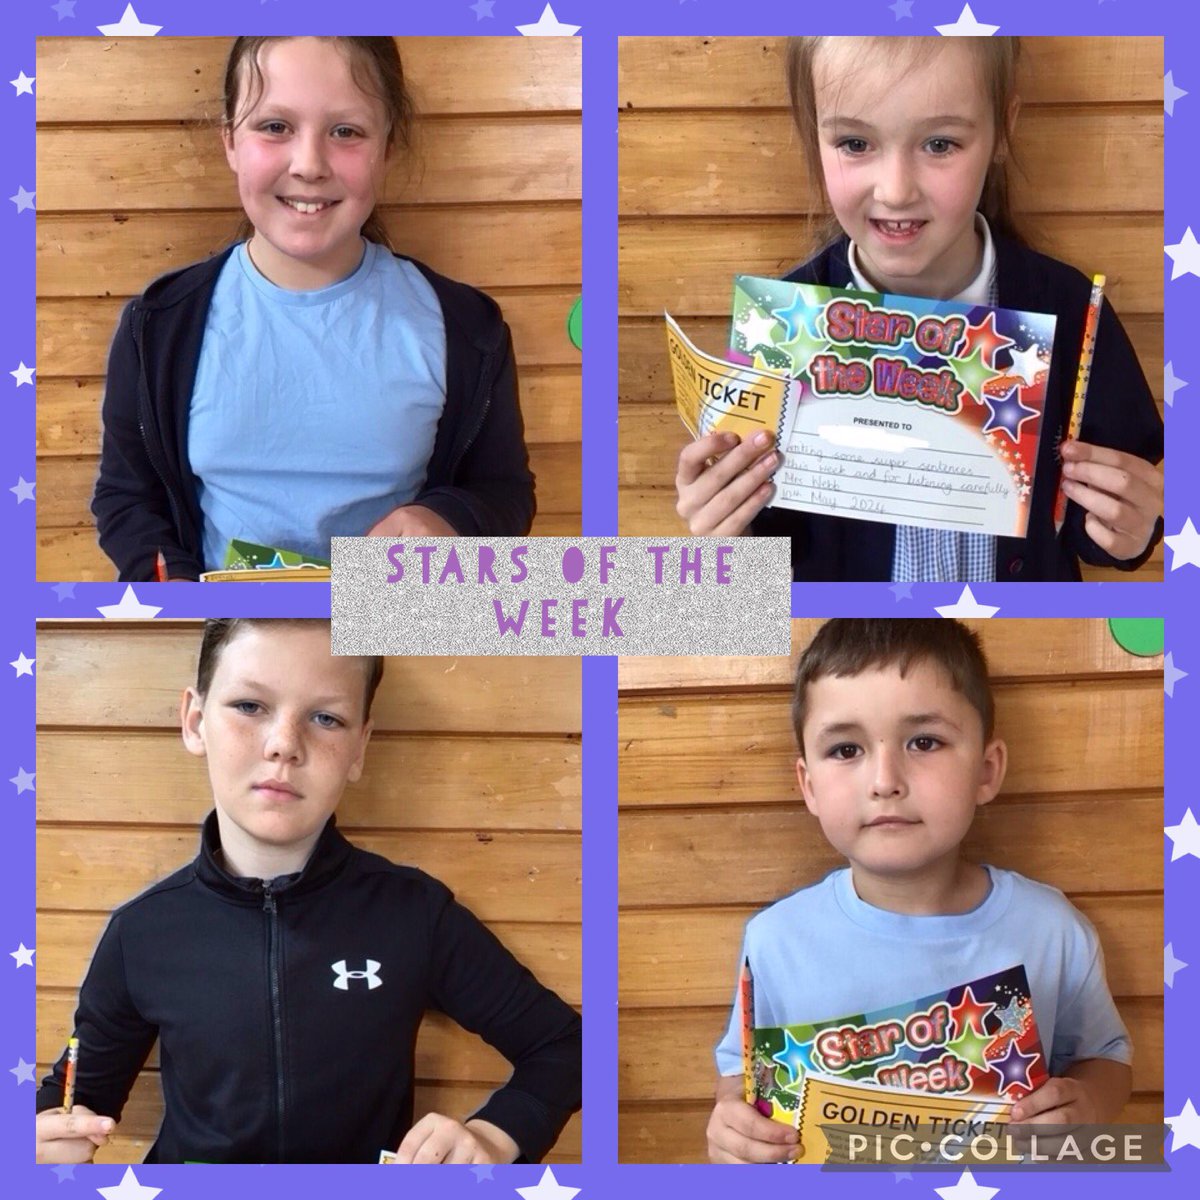 Well done to our Stars of the Week ⭐️⭐️⭐️#starsoftheweek #supersutton